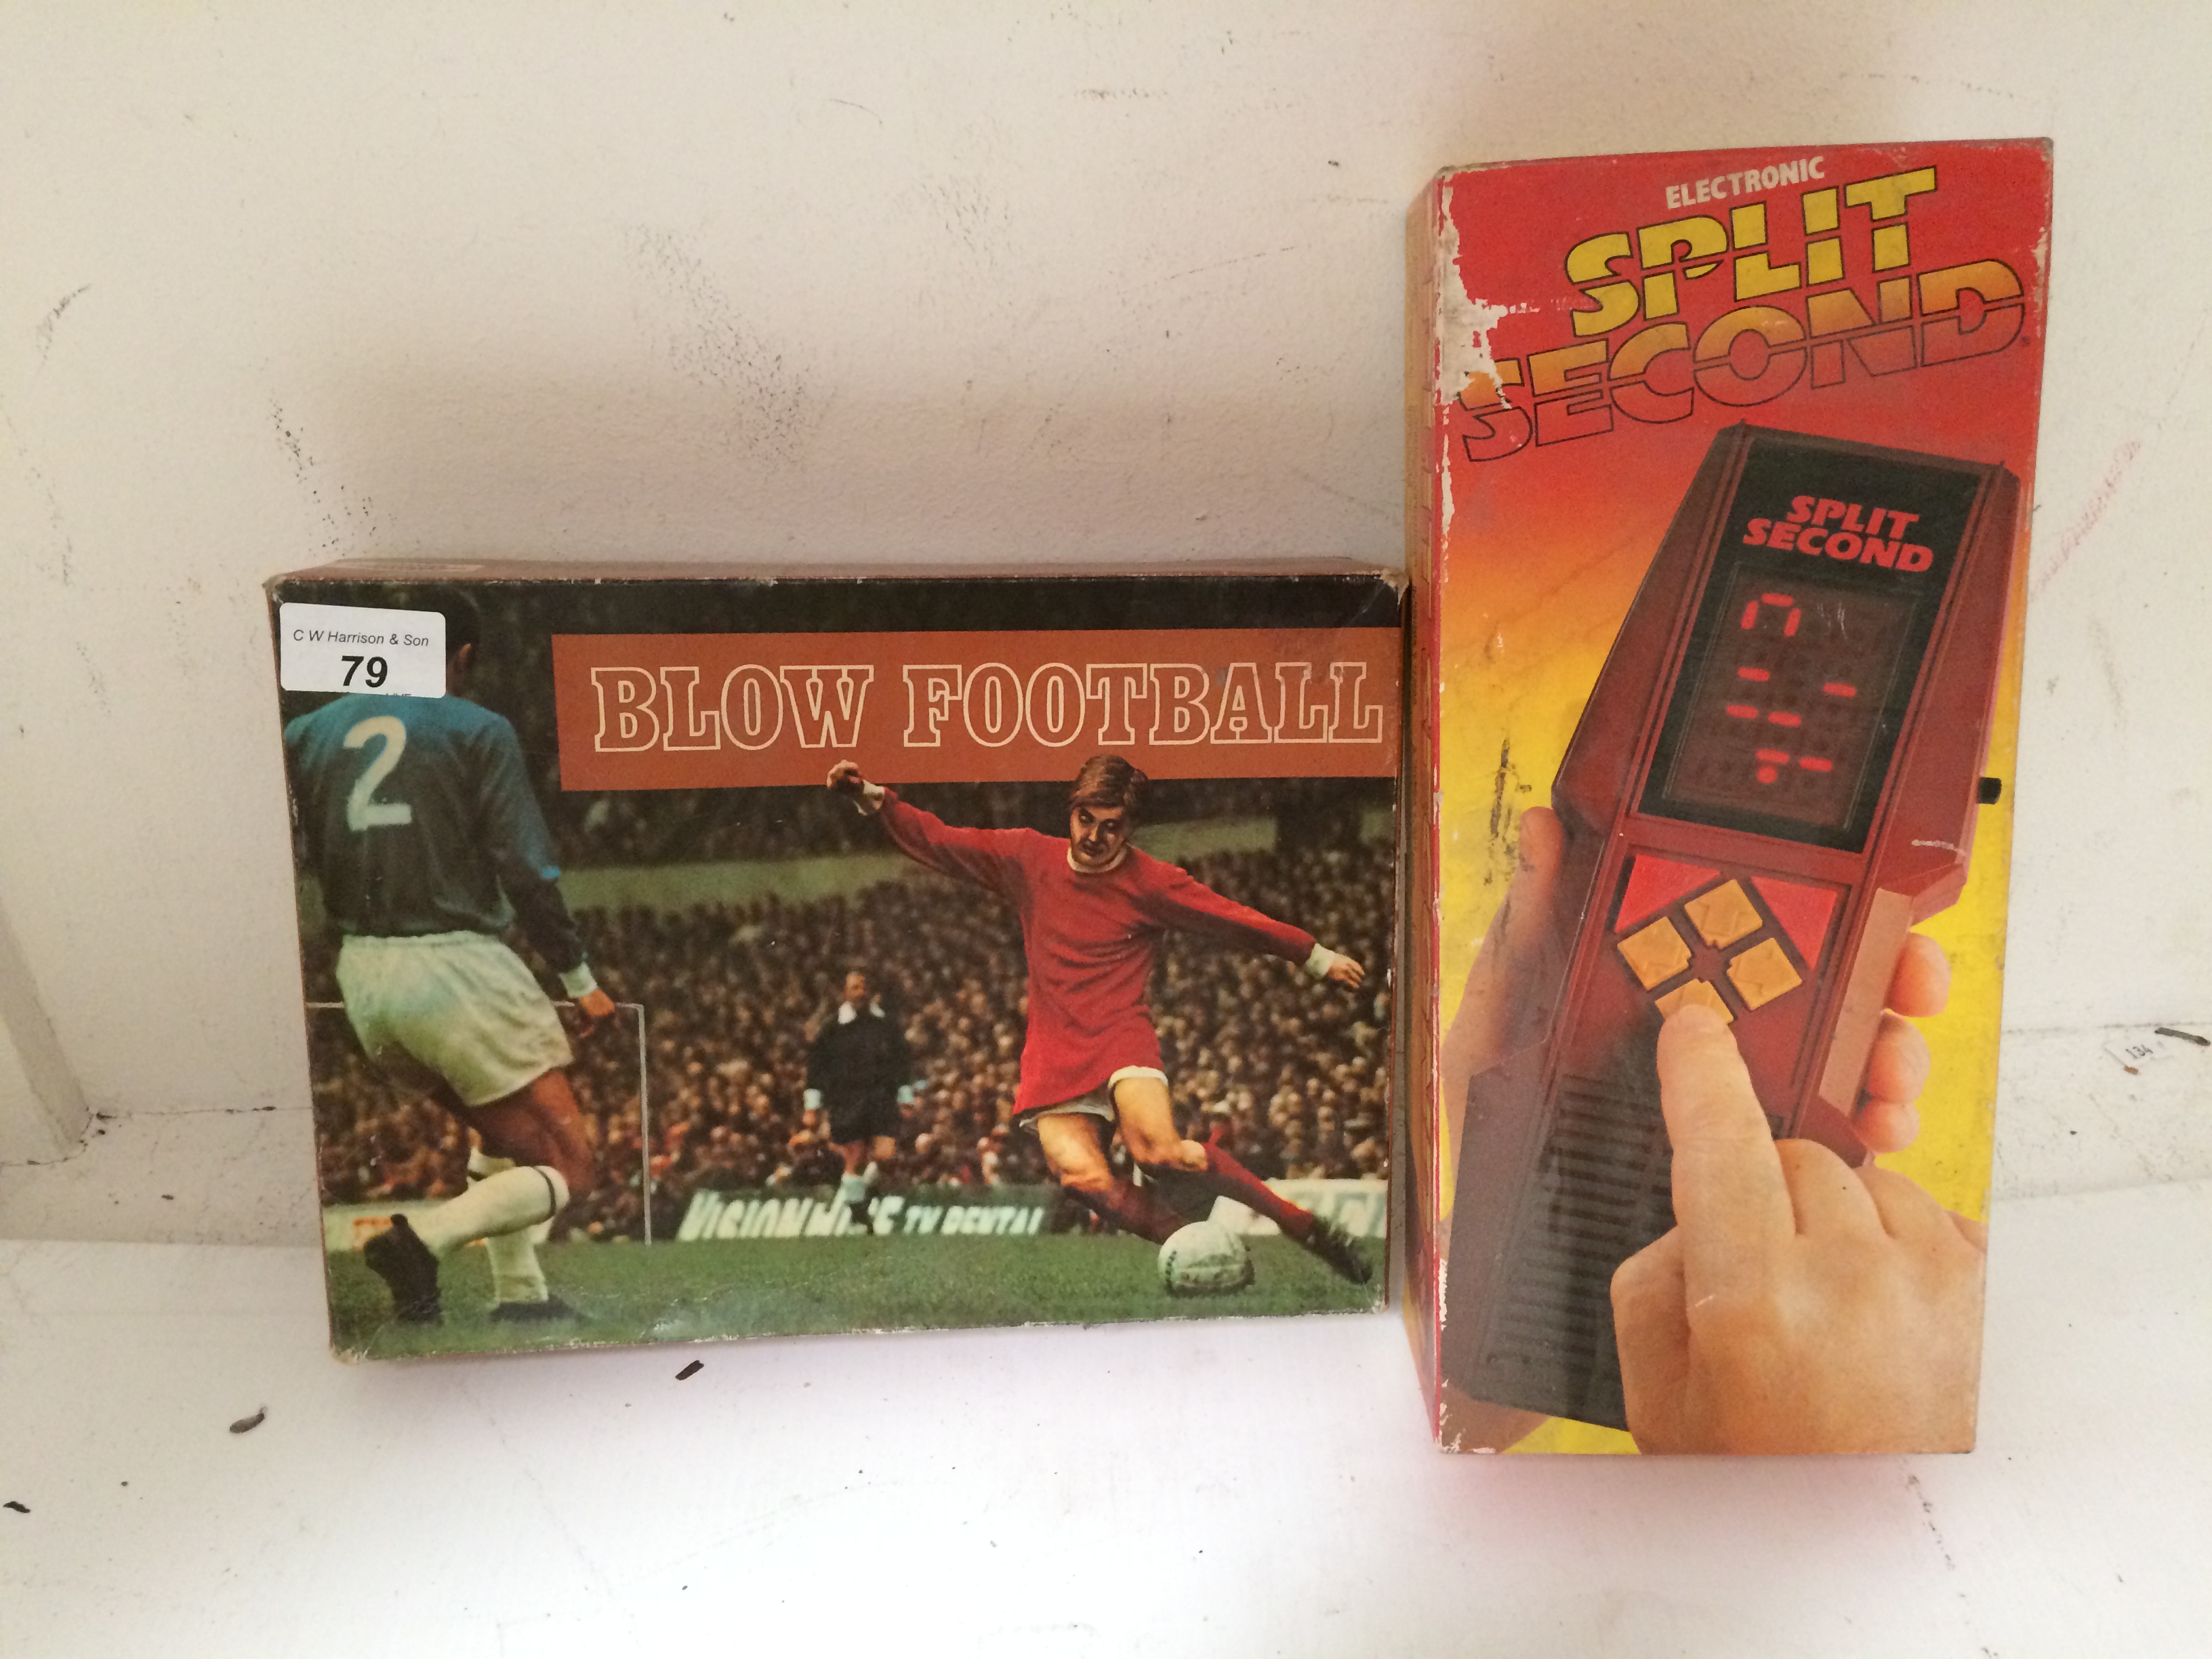 2 x items - Berwick Blow Football game and electronic "Split Second" hand held game,